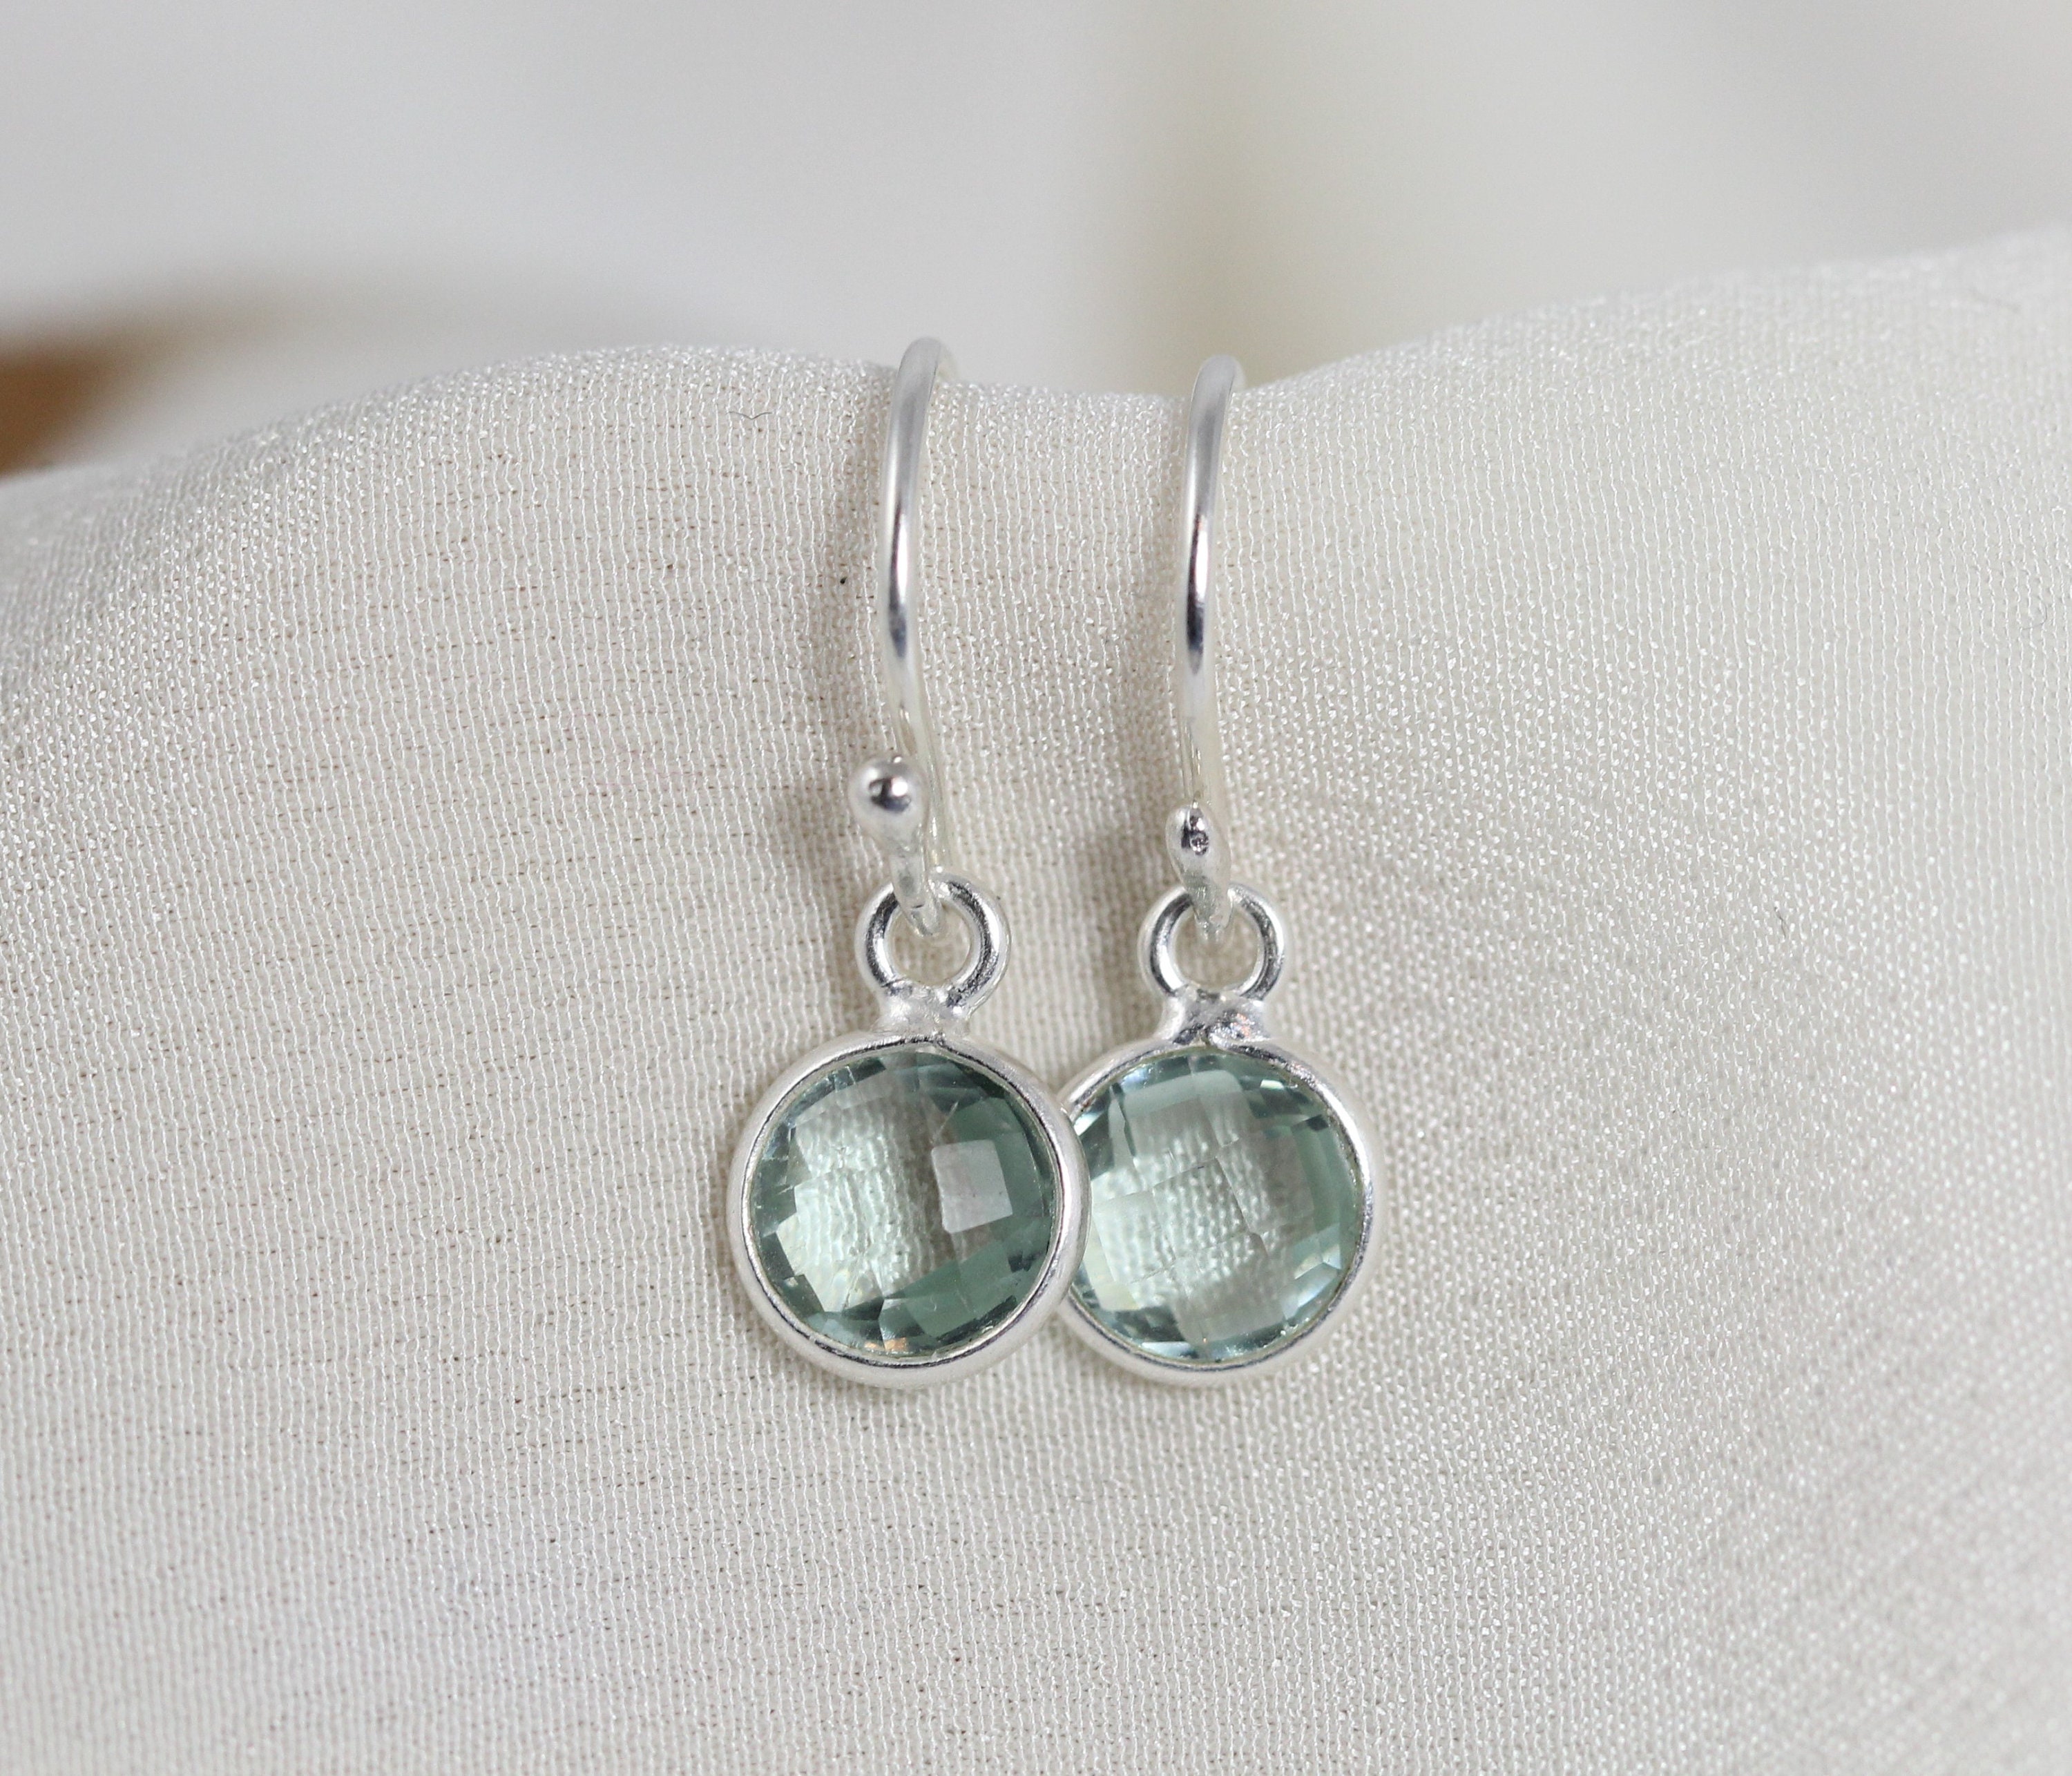 Dainty Drop Earrings Personalized Jewelry Gift for Daughter | Etsy